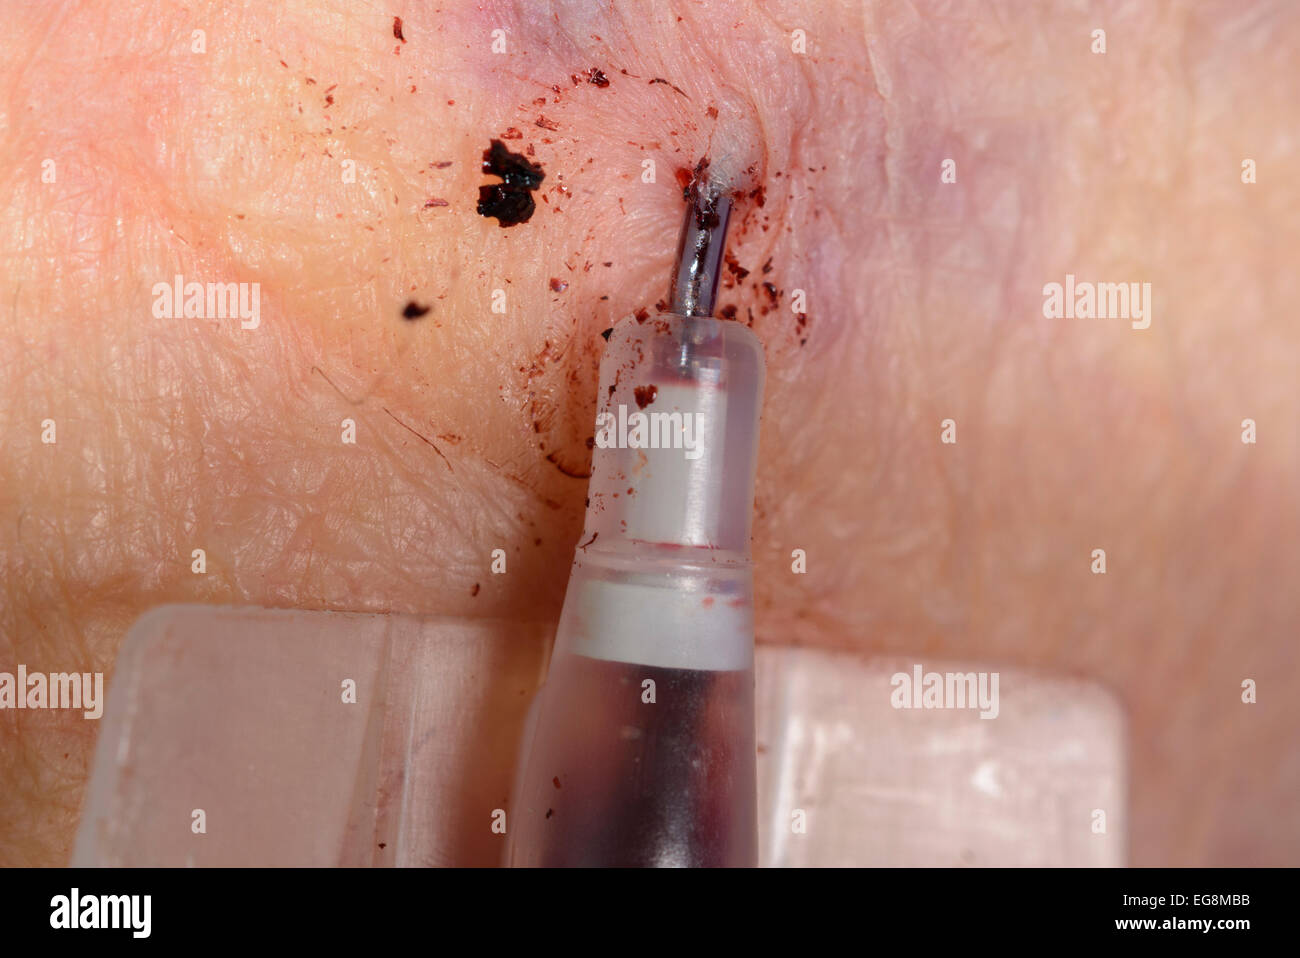 Catheter from a cannula sticking into a woman's arm. Stock Photo